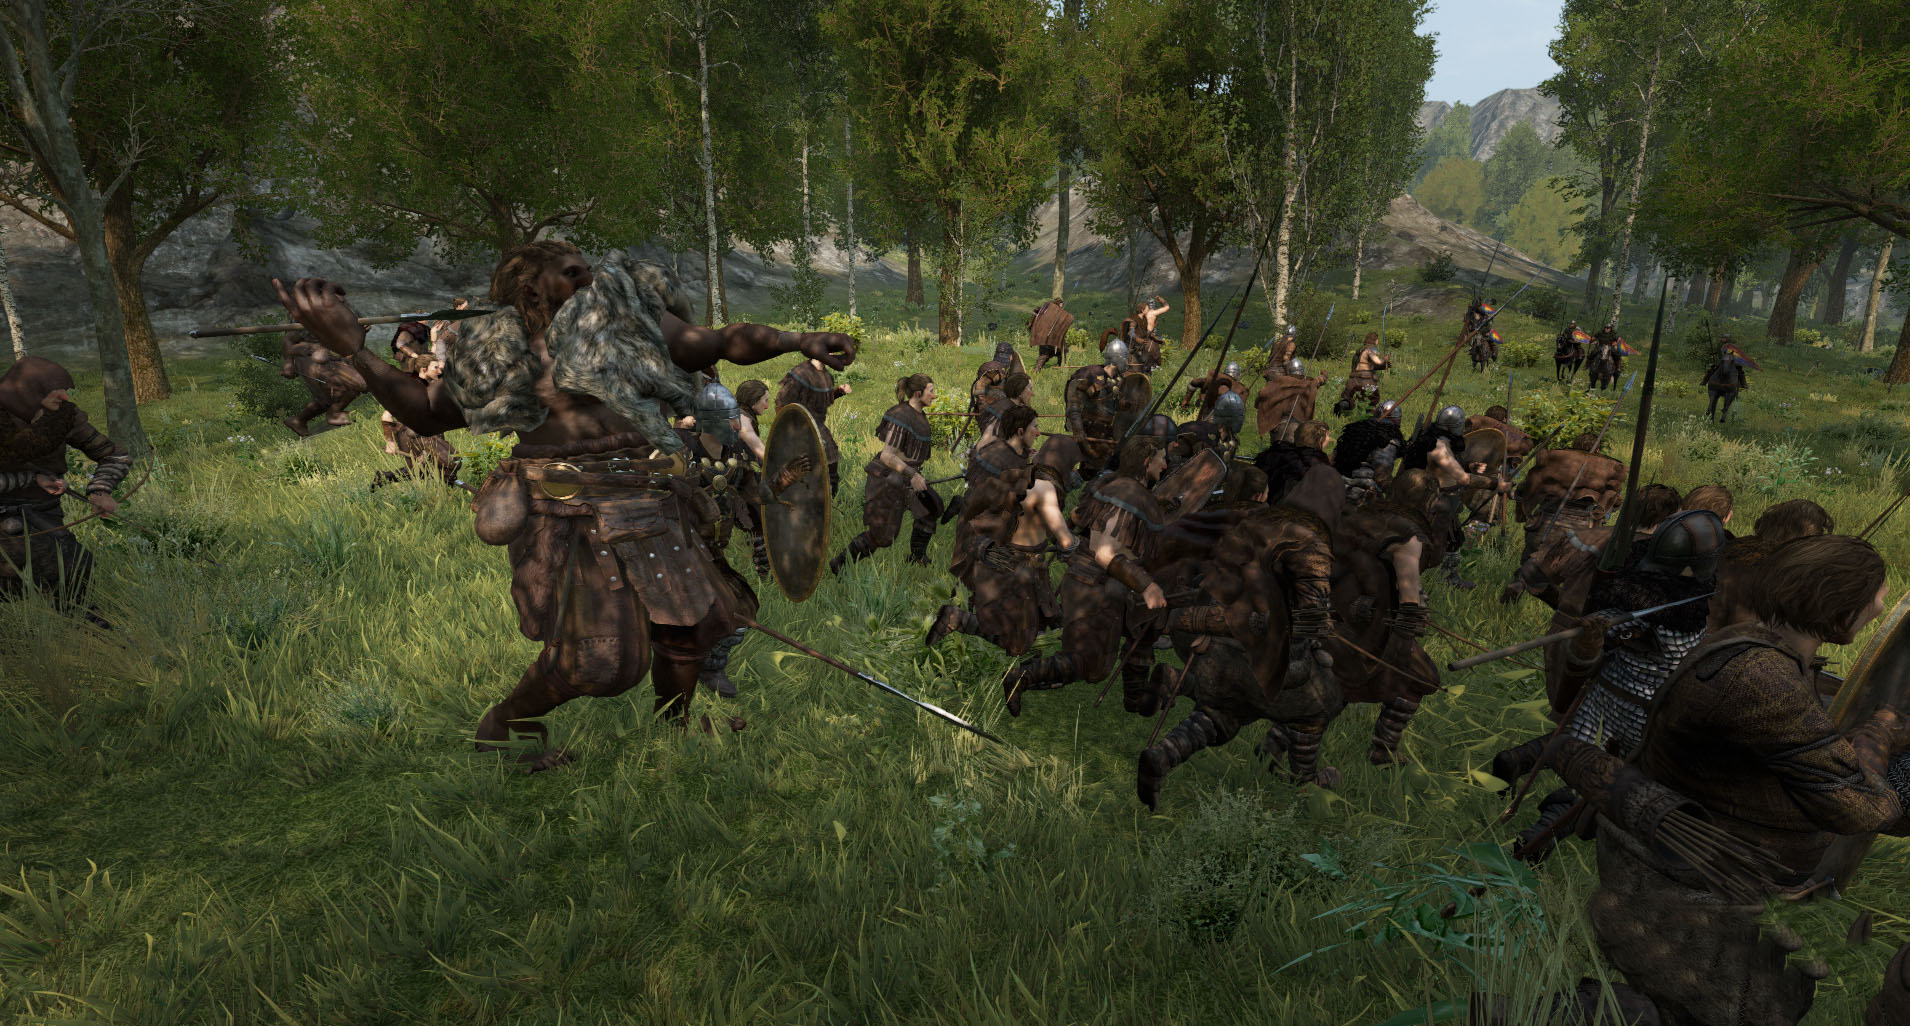 orc attack 18 image - Hammerlord mod for Mount & Blade II: Bannerlord ...